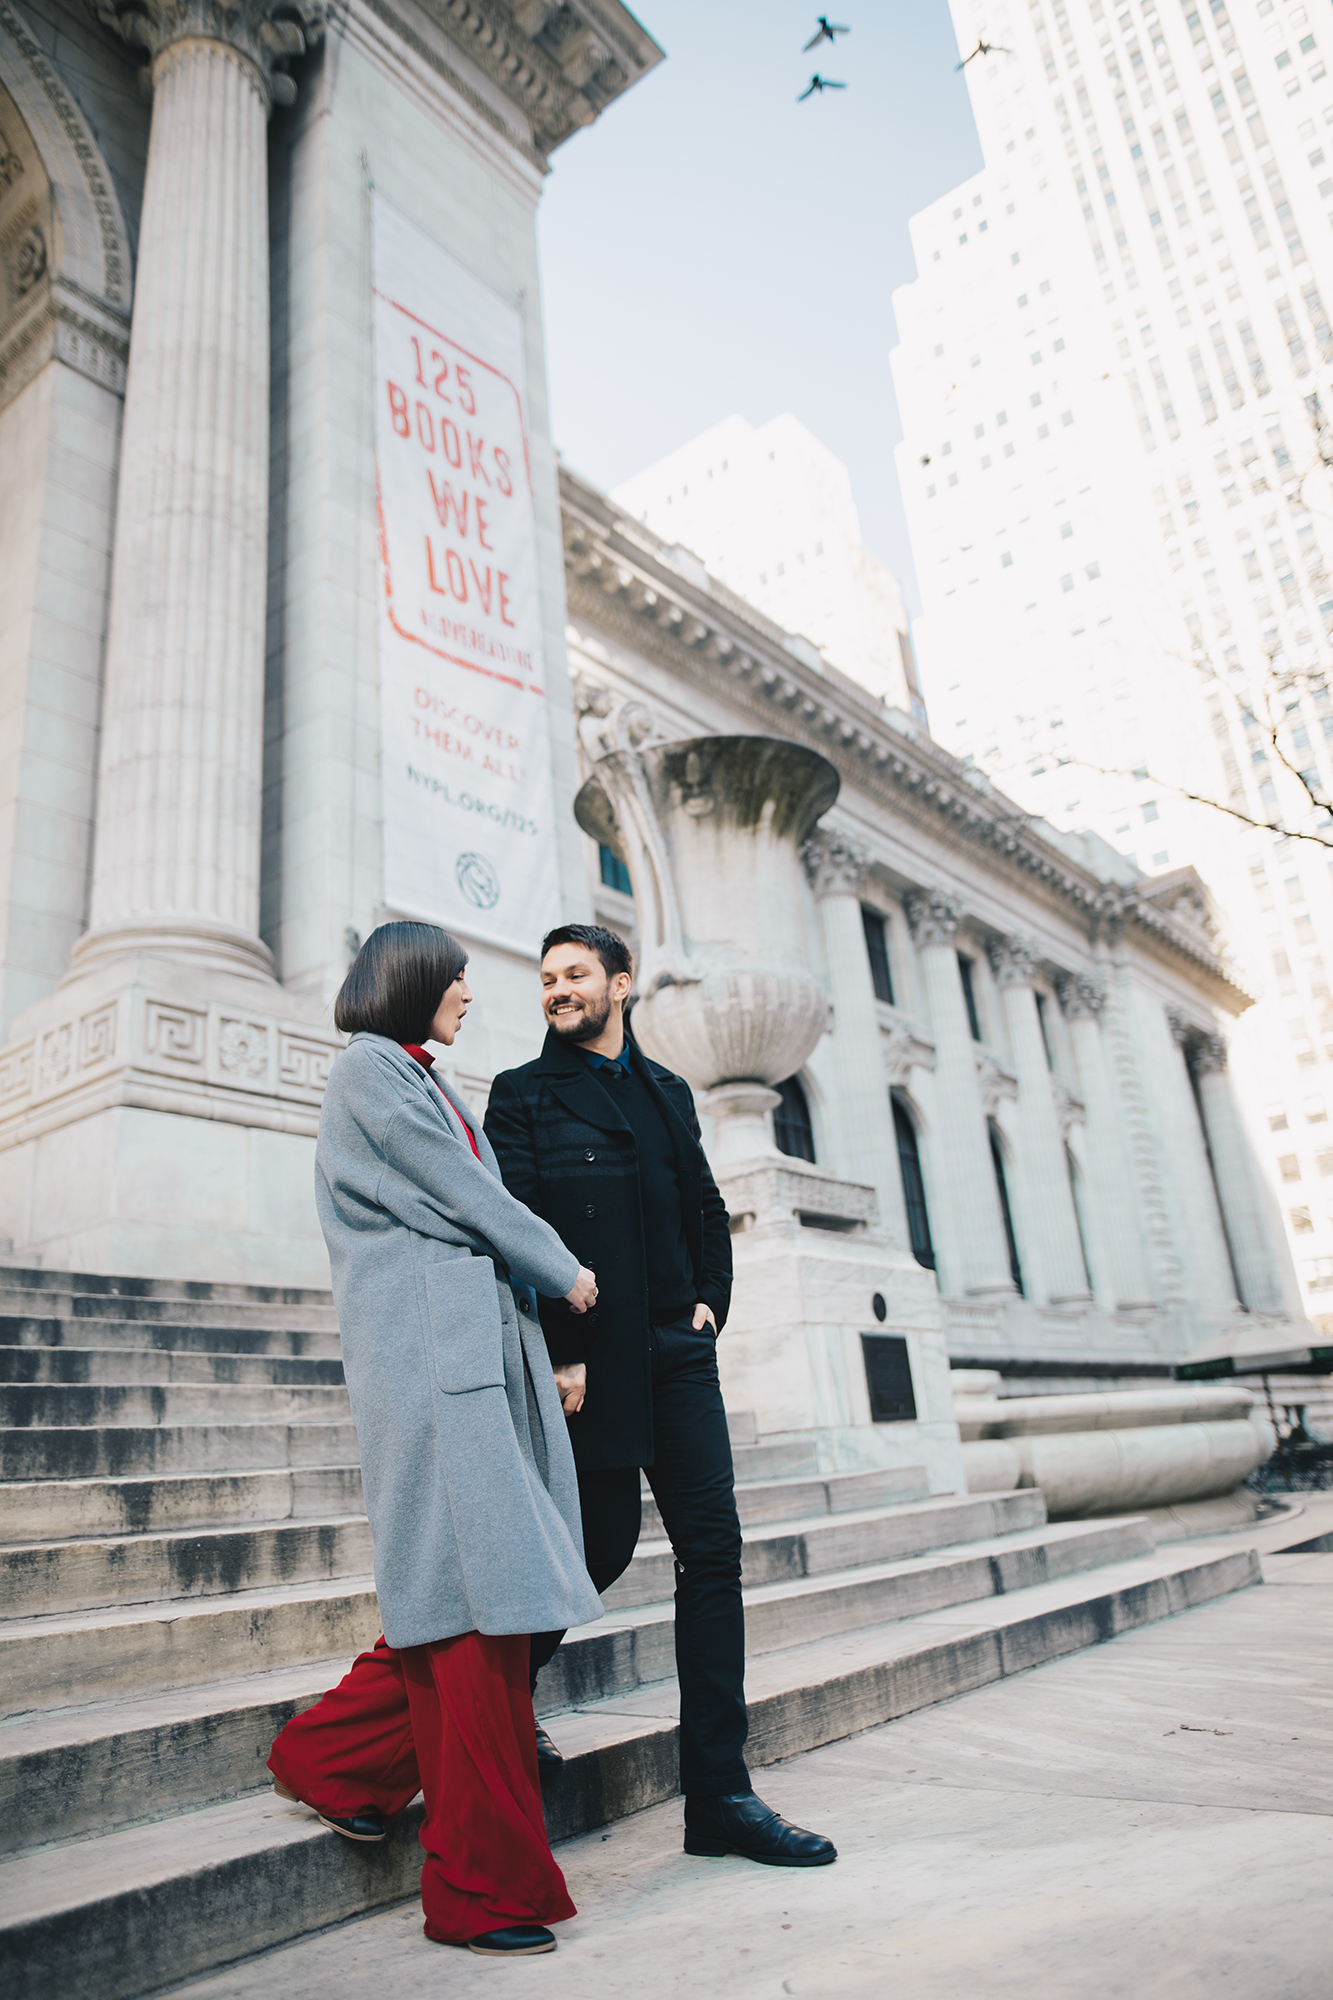 Wonderful NYC Engagement photo locations and ideas